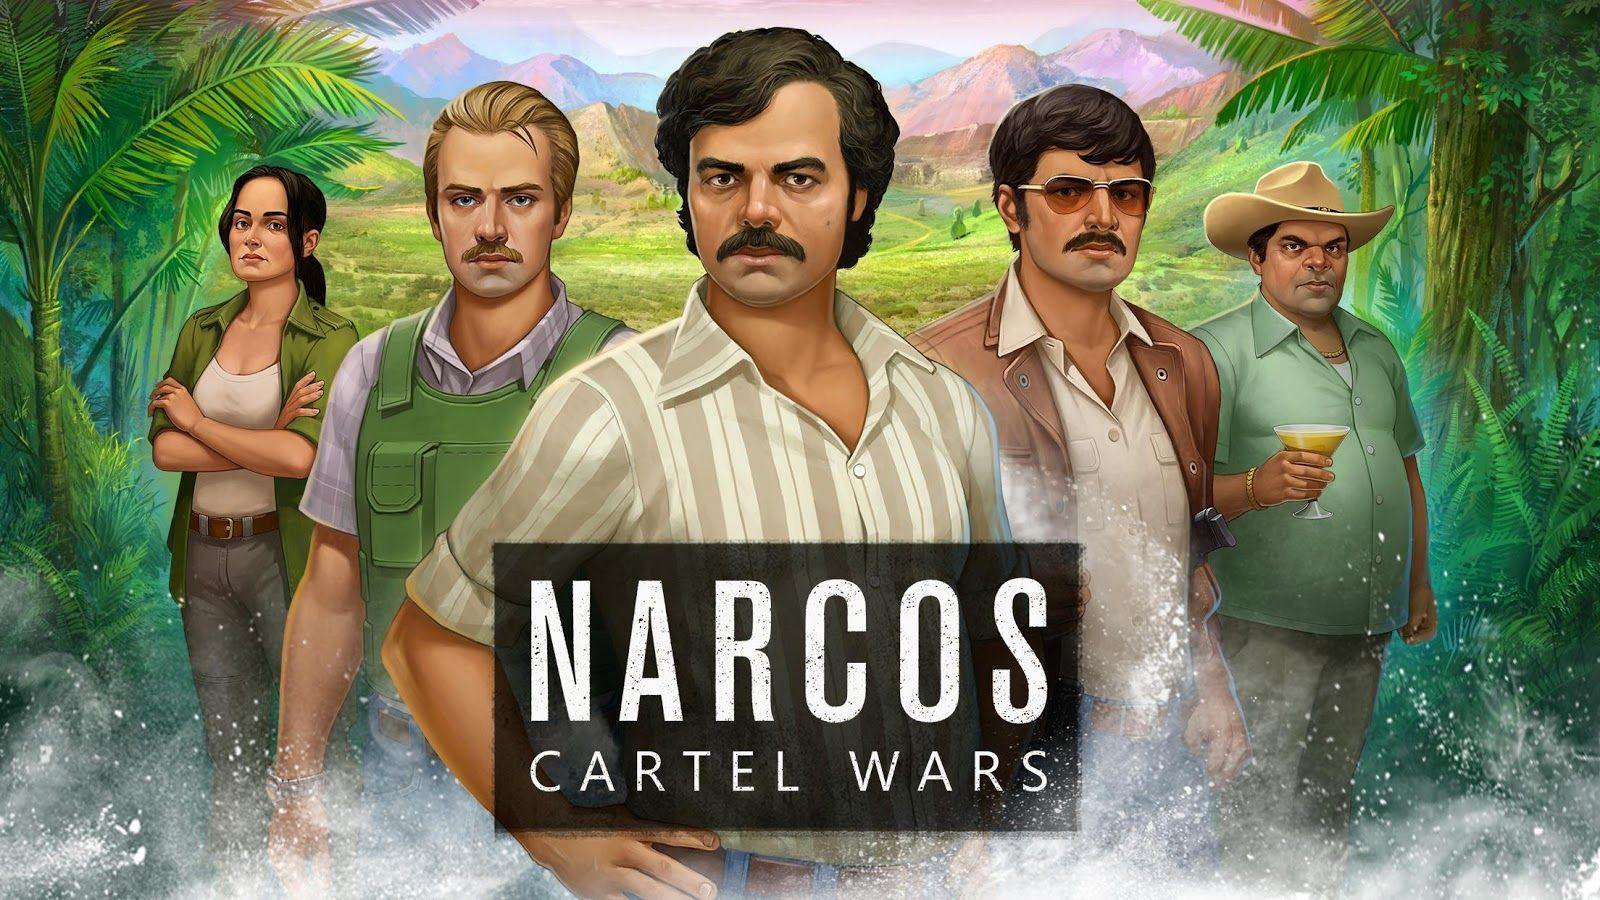 Narcos: Cartel Wars Apps on Google Play